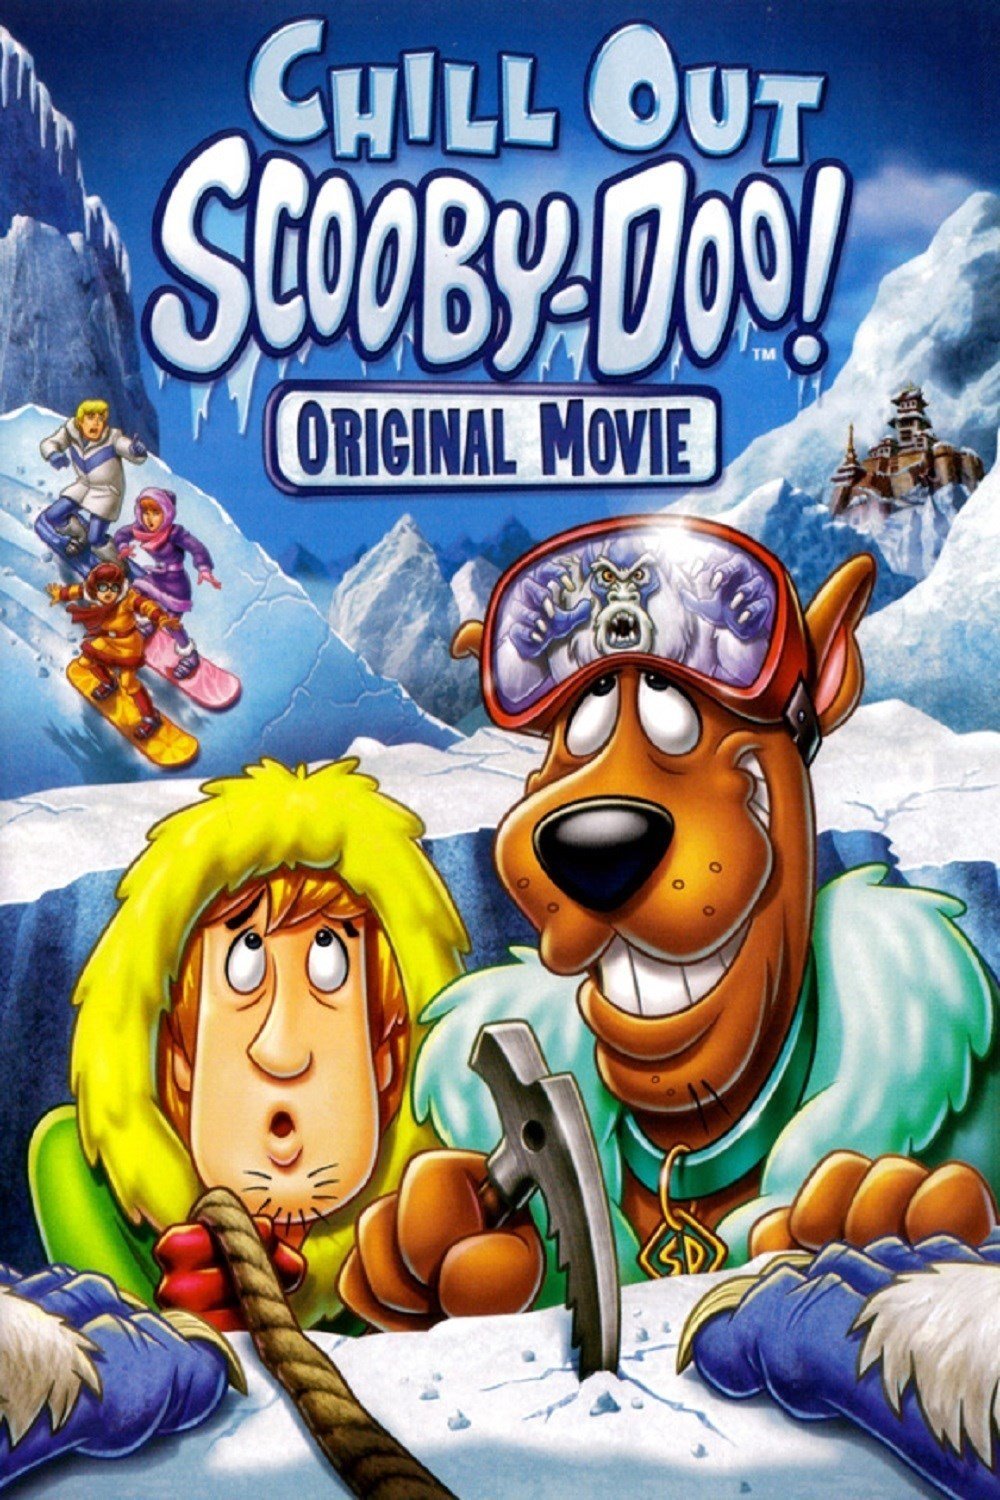 Poster of the movie Chill Out, Scooby-Doo!